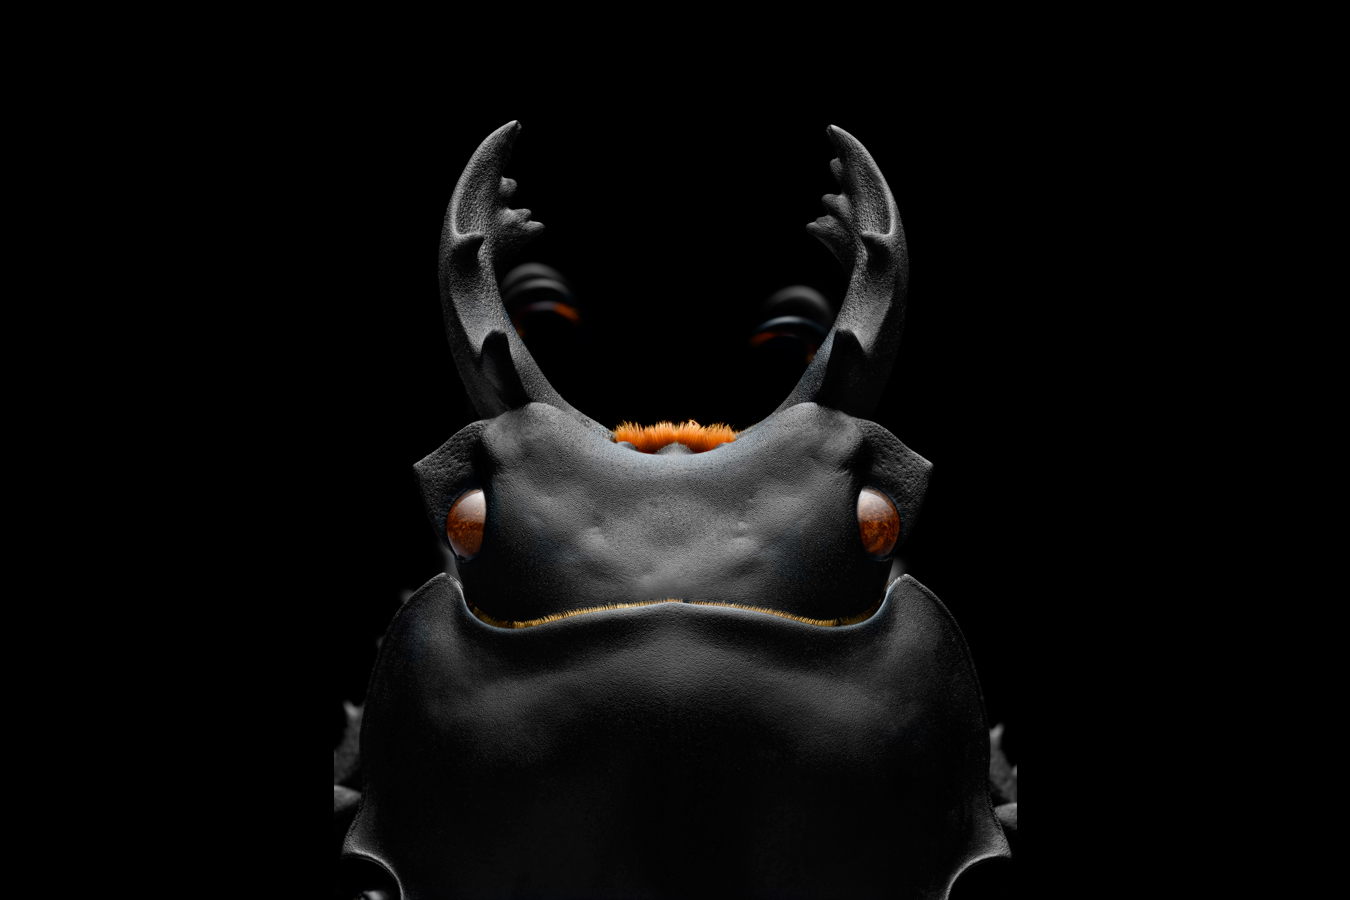 The mighty jaws of a stag beetle (Neolucanus maximus) photographed from a museum specimen. Photo: Yuan Ji, participant in Invertebrates category.  ​​📷 Jaws of a stag beetle ⁣ Category Invertebrates⁣ Yuan Ji | cupoty.com⁣